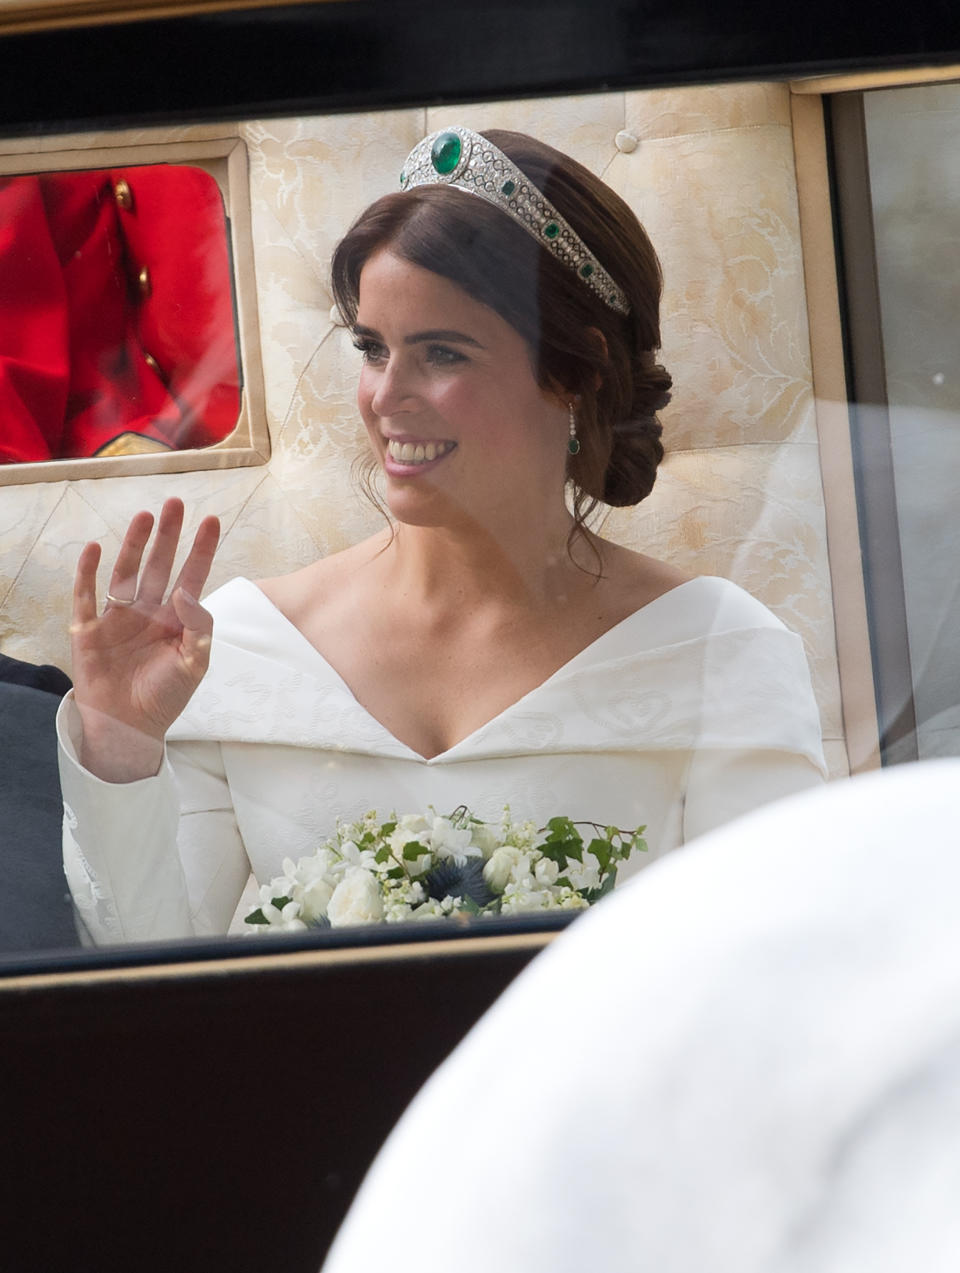 Princess Eugenie of York waves to the crowds from her carriage following their wedding ceremony at St. George's Chapel in Windsor Castle on October 12, 2018